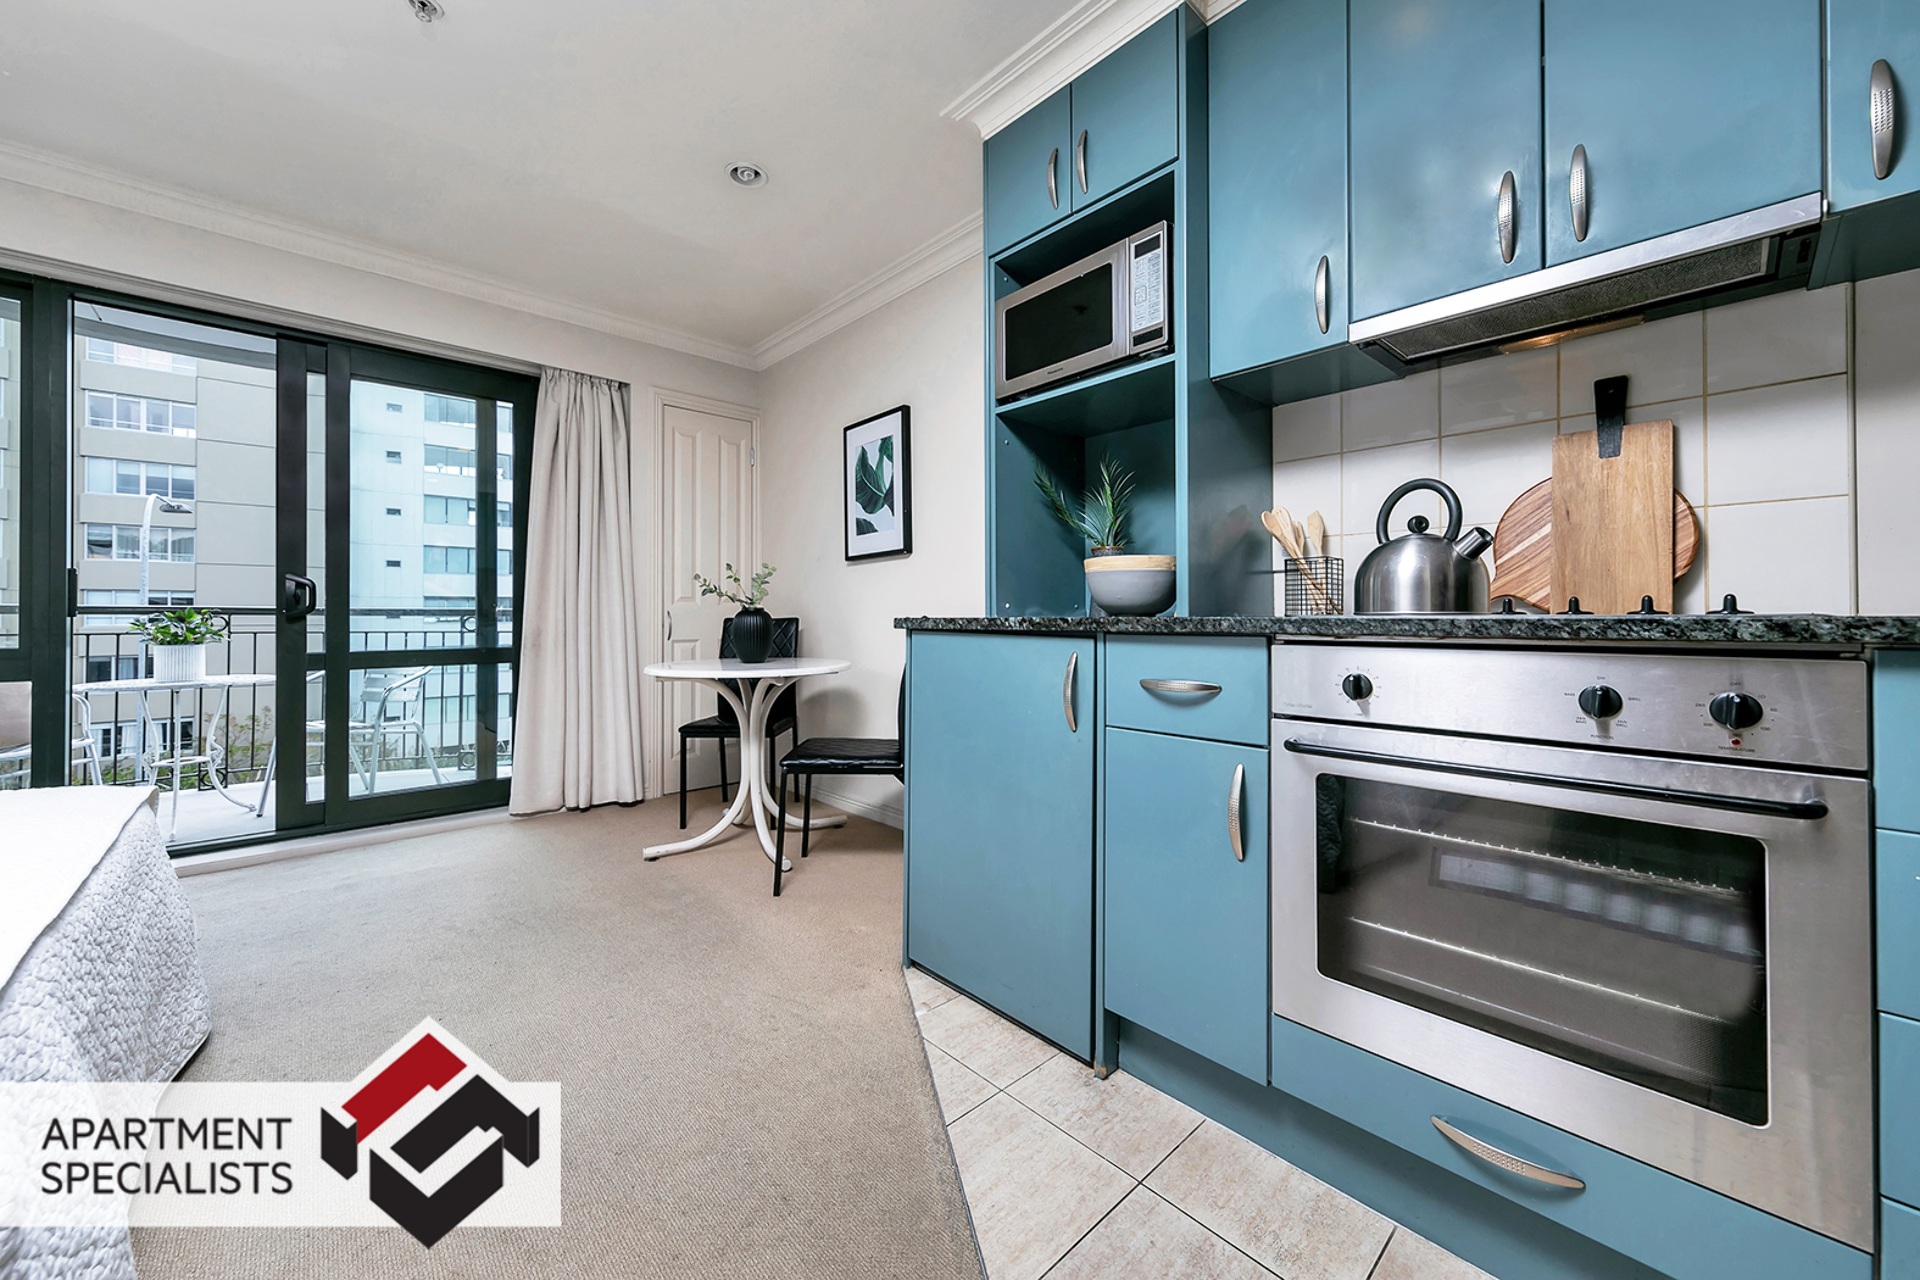 3 | 118 Gladstone Road, Parnell | Apartment Specialists